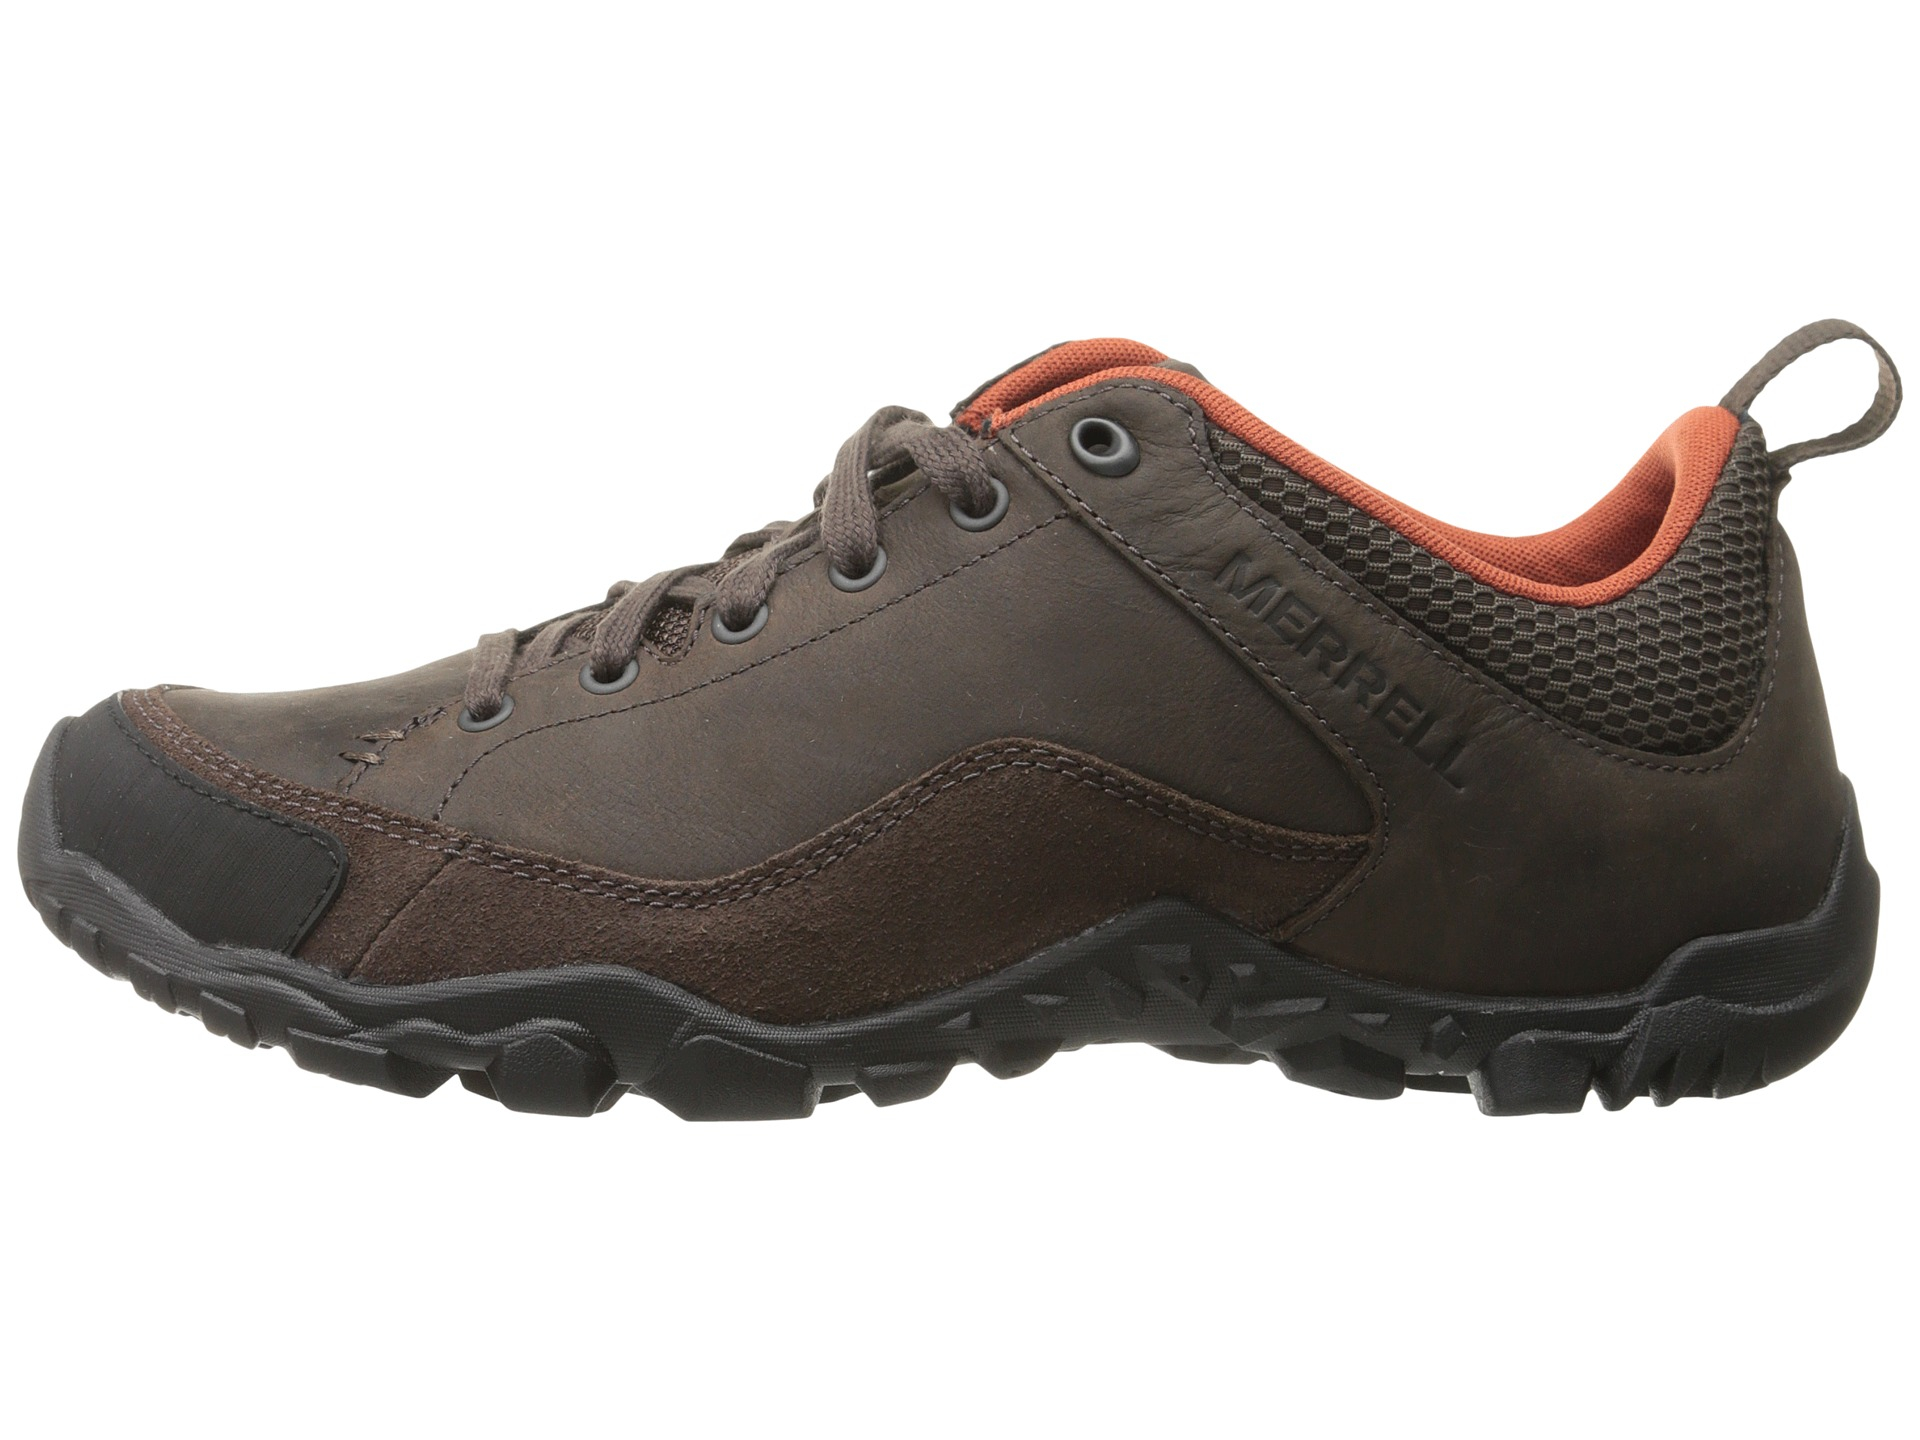 Lyst - Merrell Telluride Moc Shoes in Brown for Men